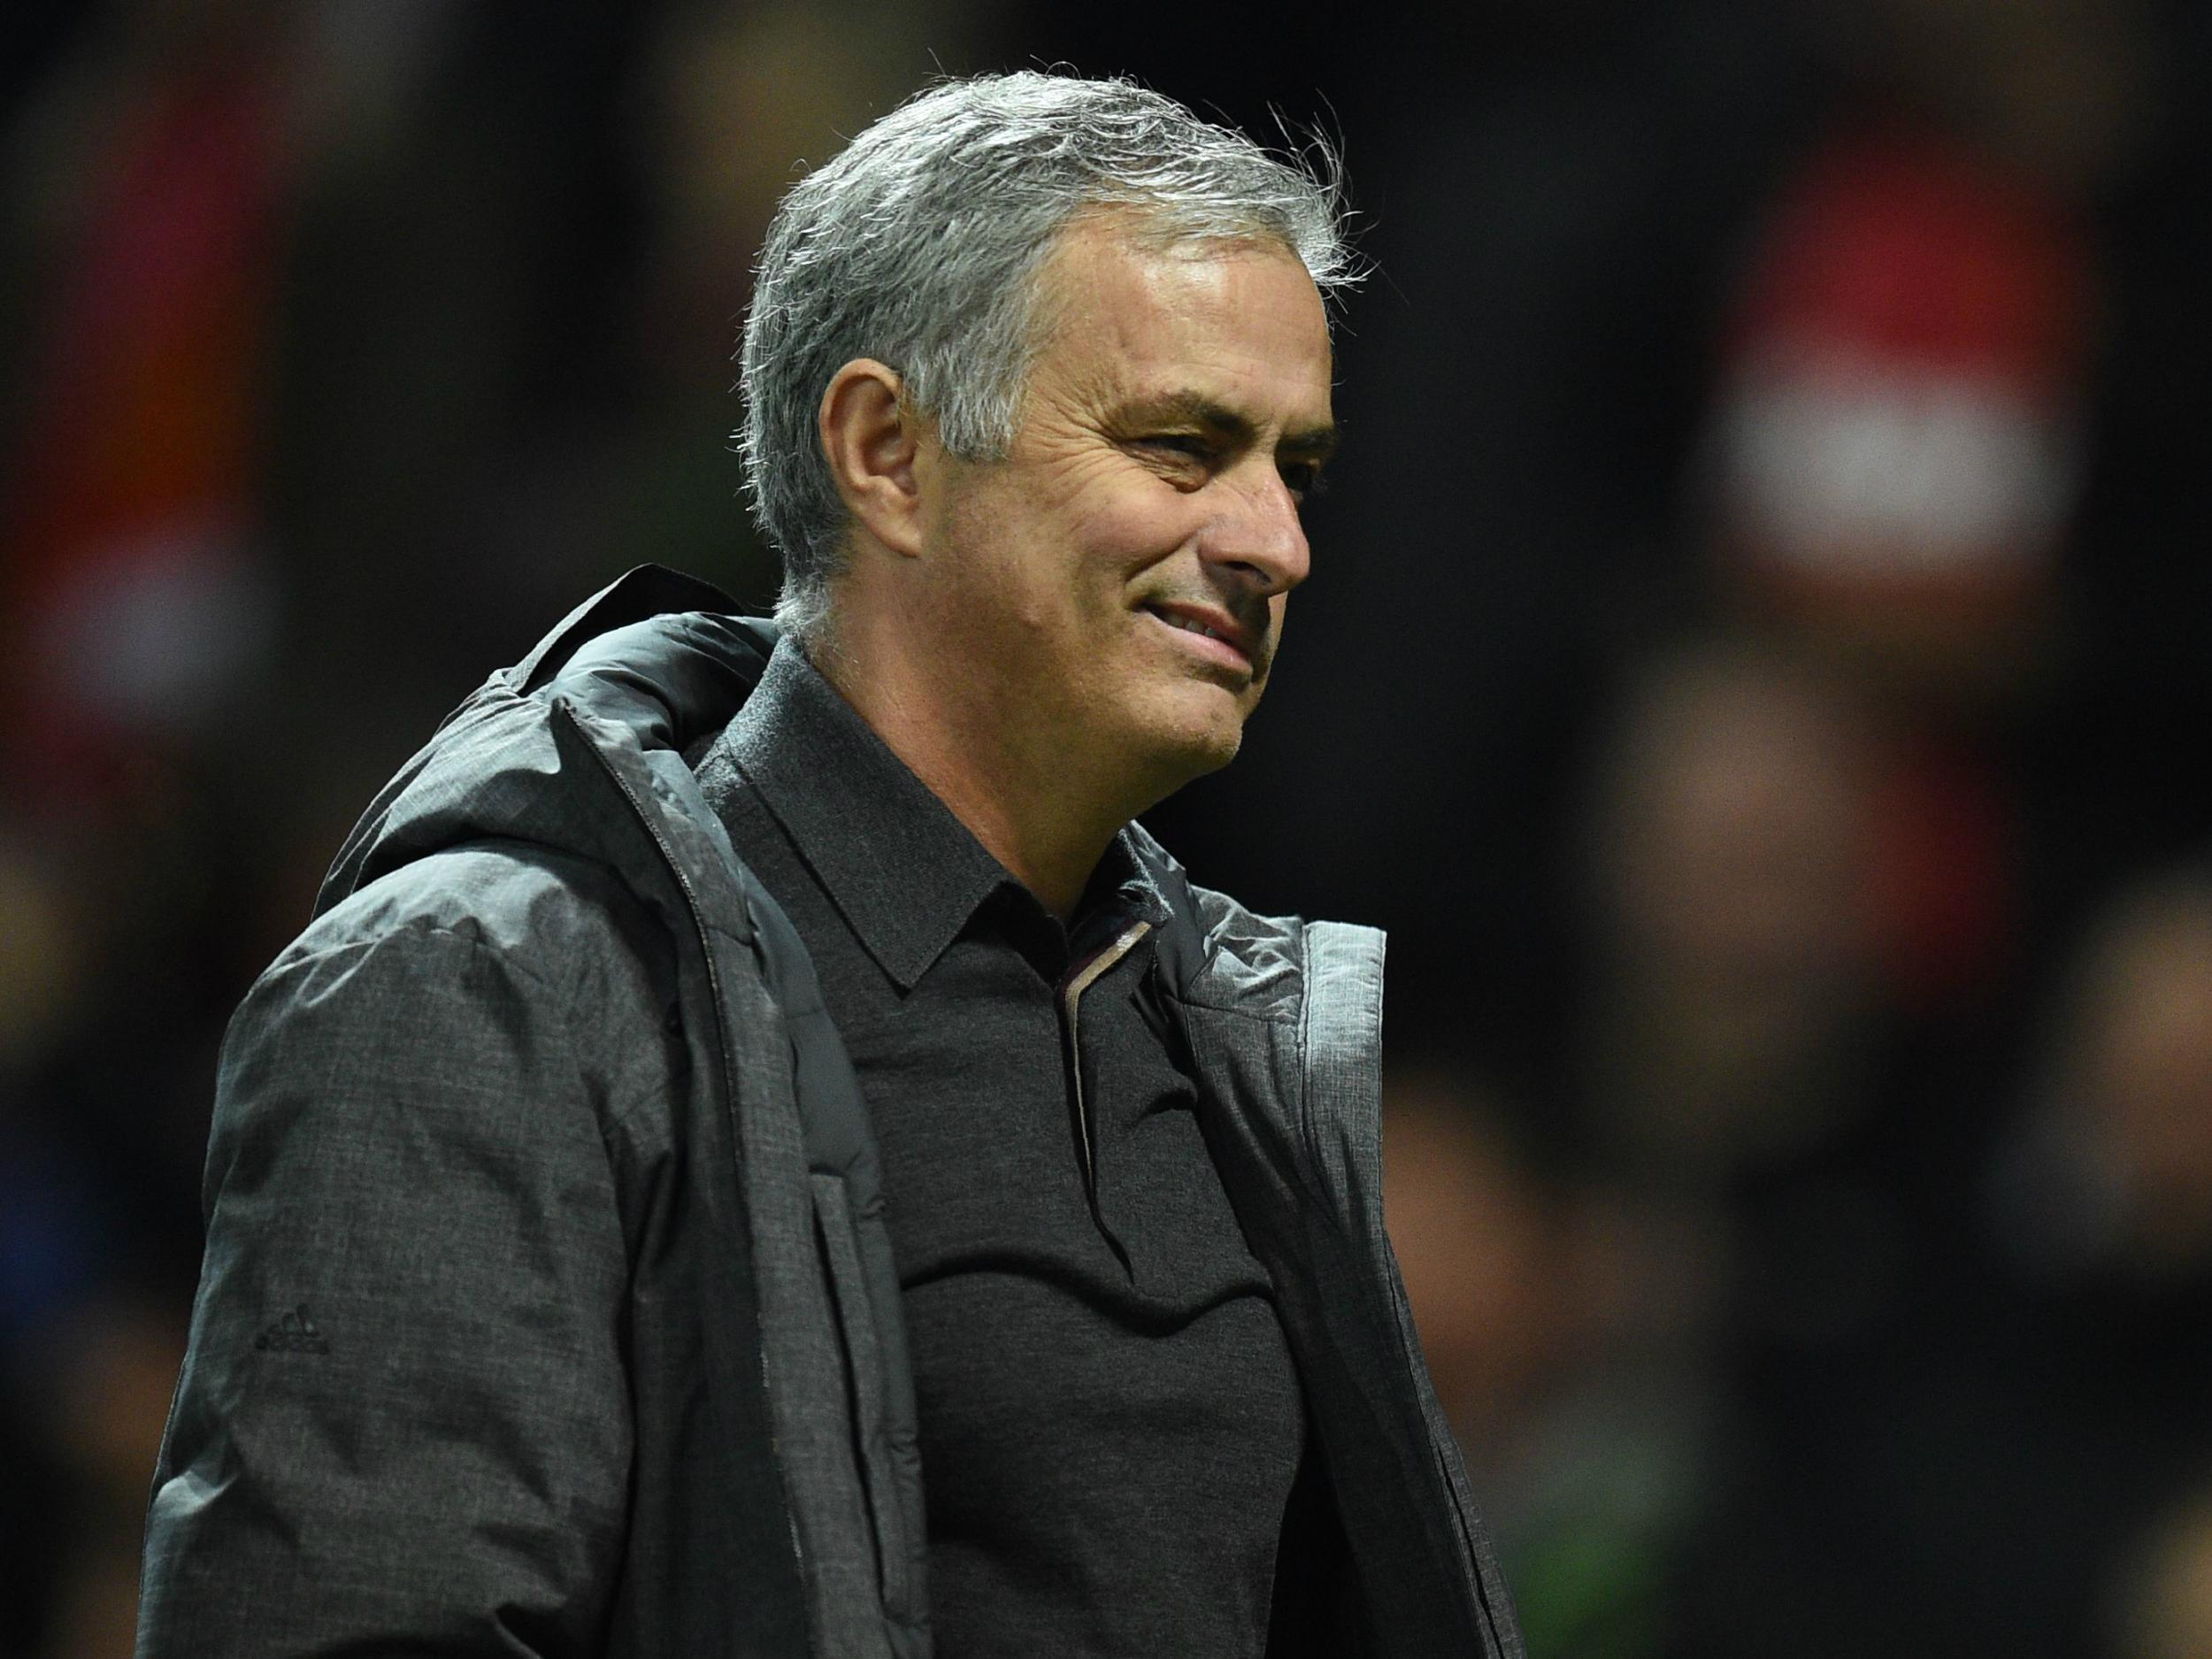 Jose Mourinho took a swipe at pundits that have been criticising his Manchester United team